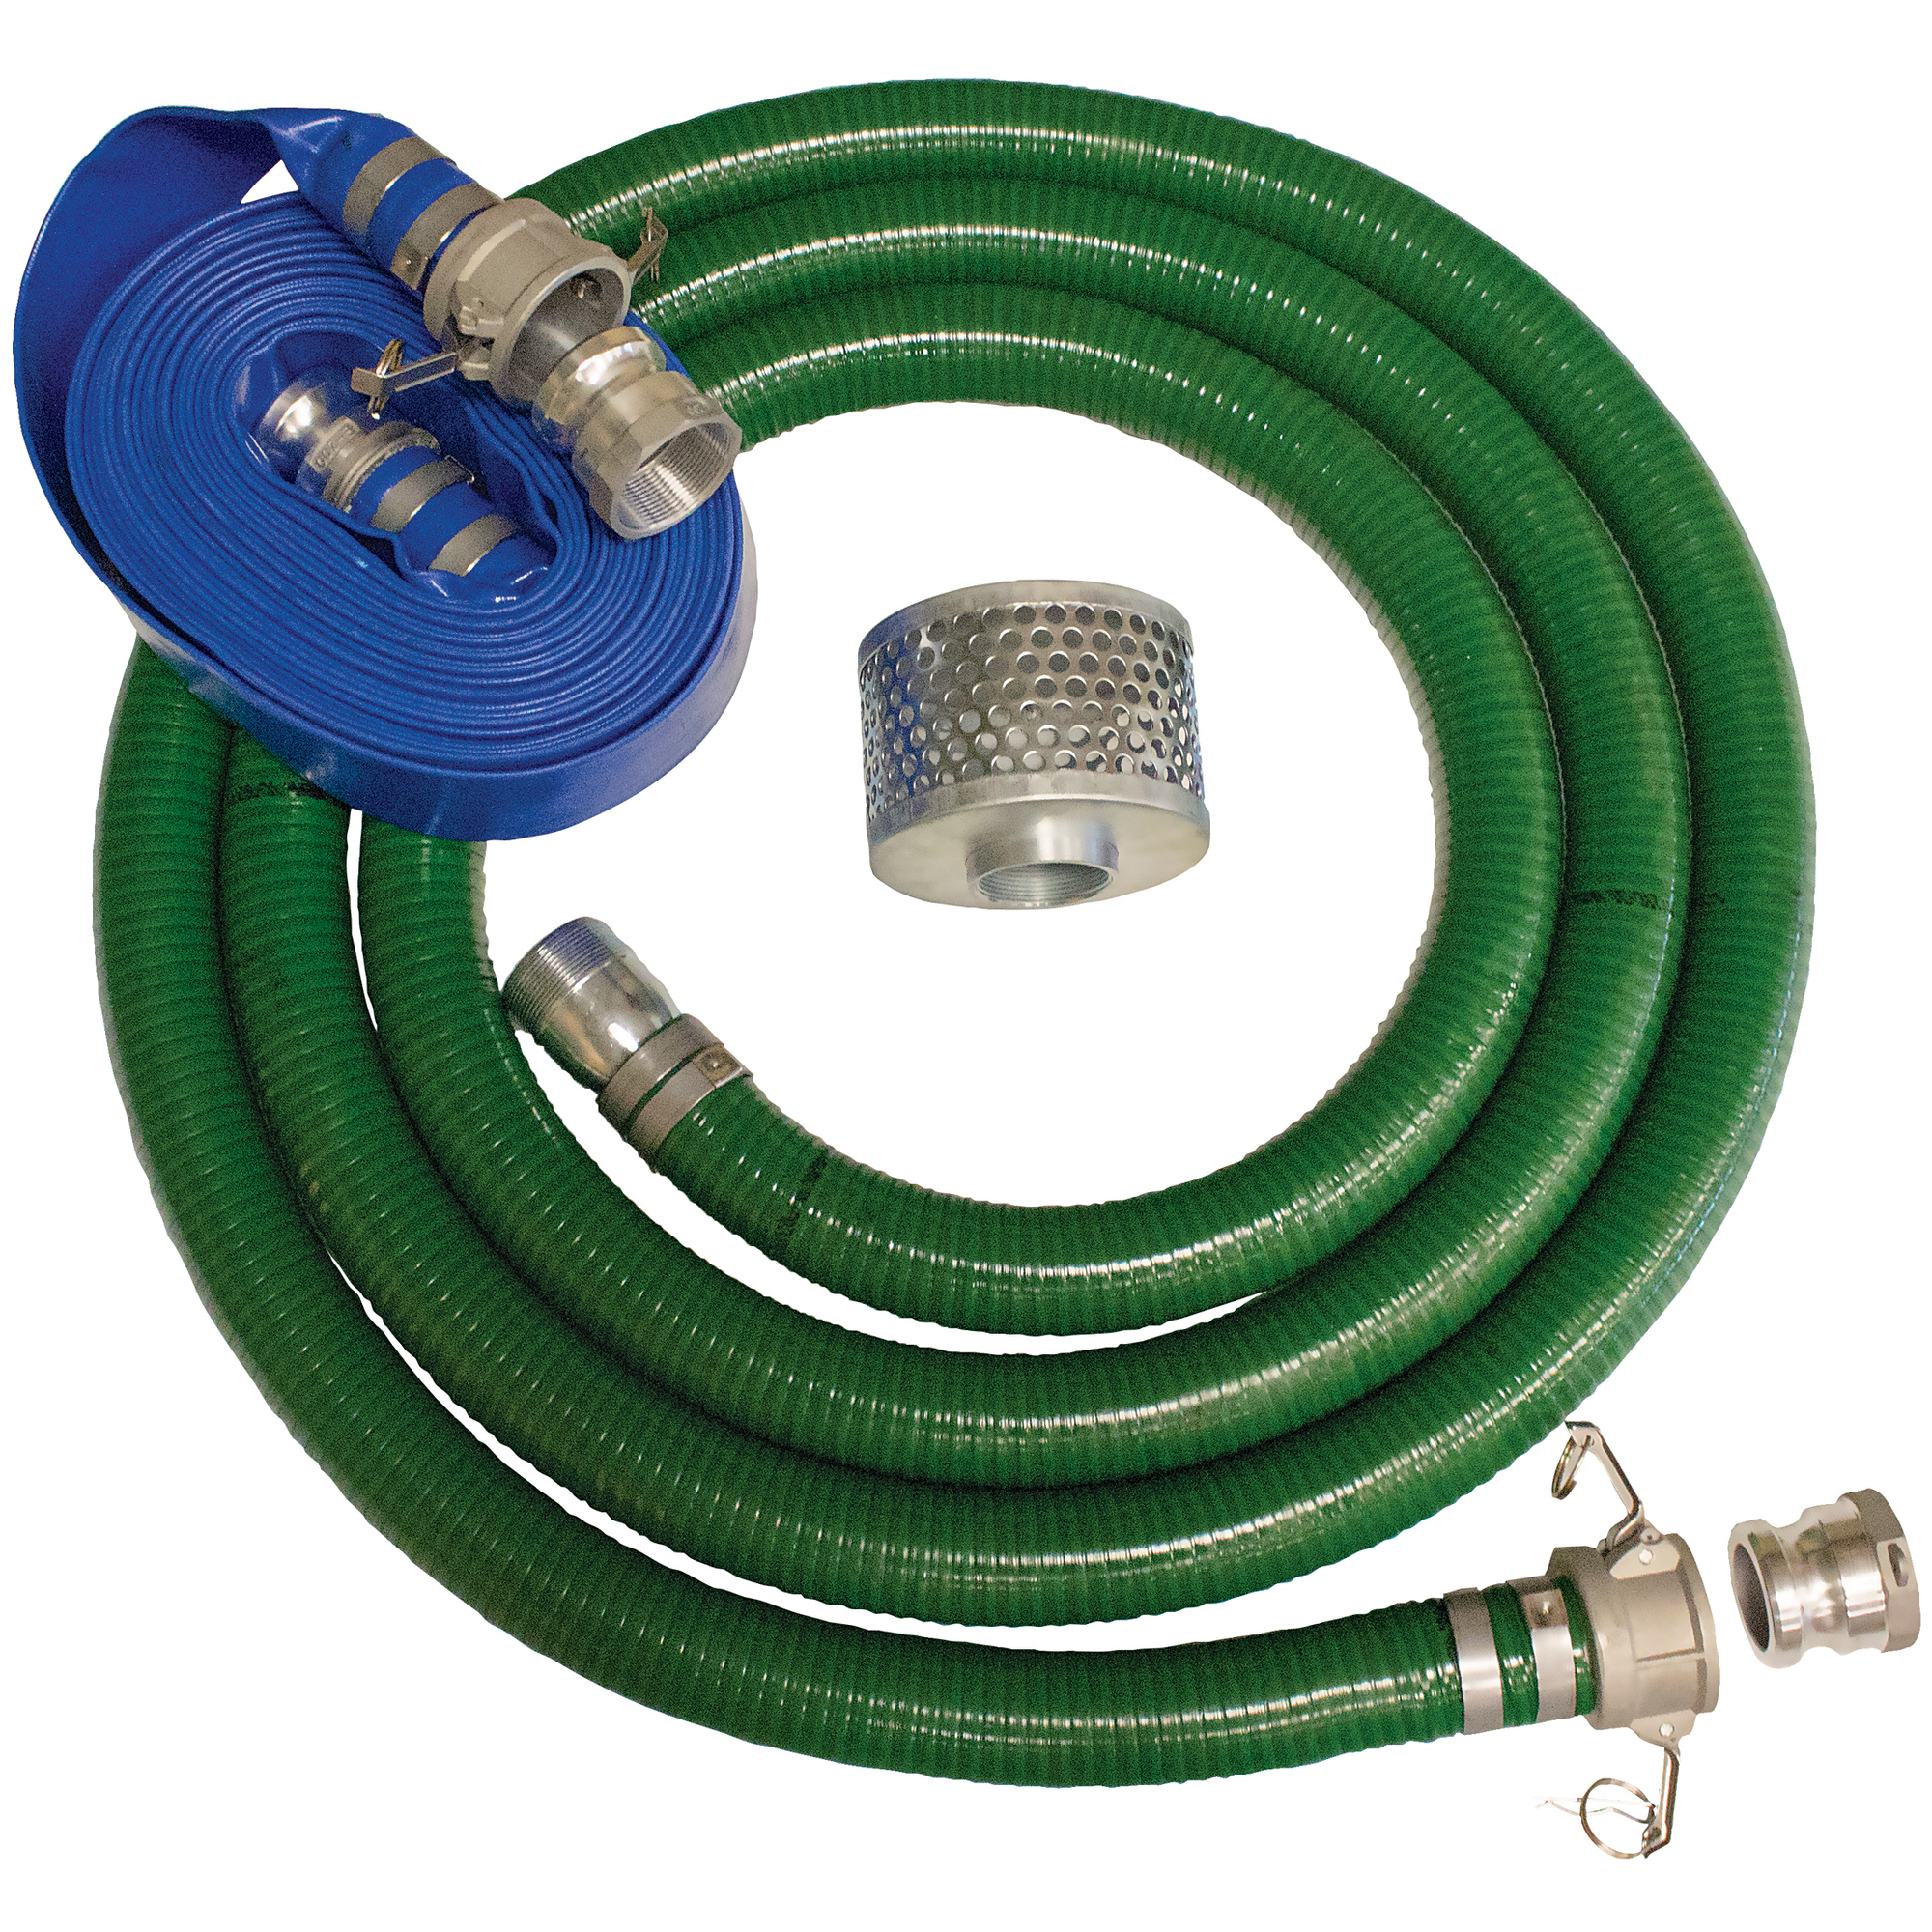 Brave, 3Inch Hose Kit with 20ft. intake and 50ft. discharge, Hose Diameter 3 in, Hose Length 0 ft, Max. PSI 65, Model BRHK3